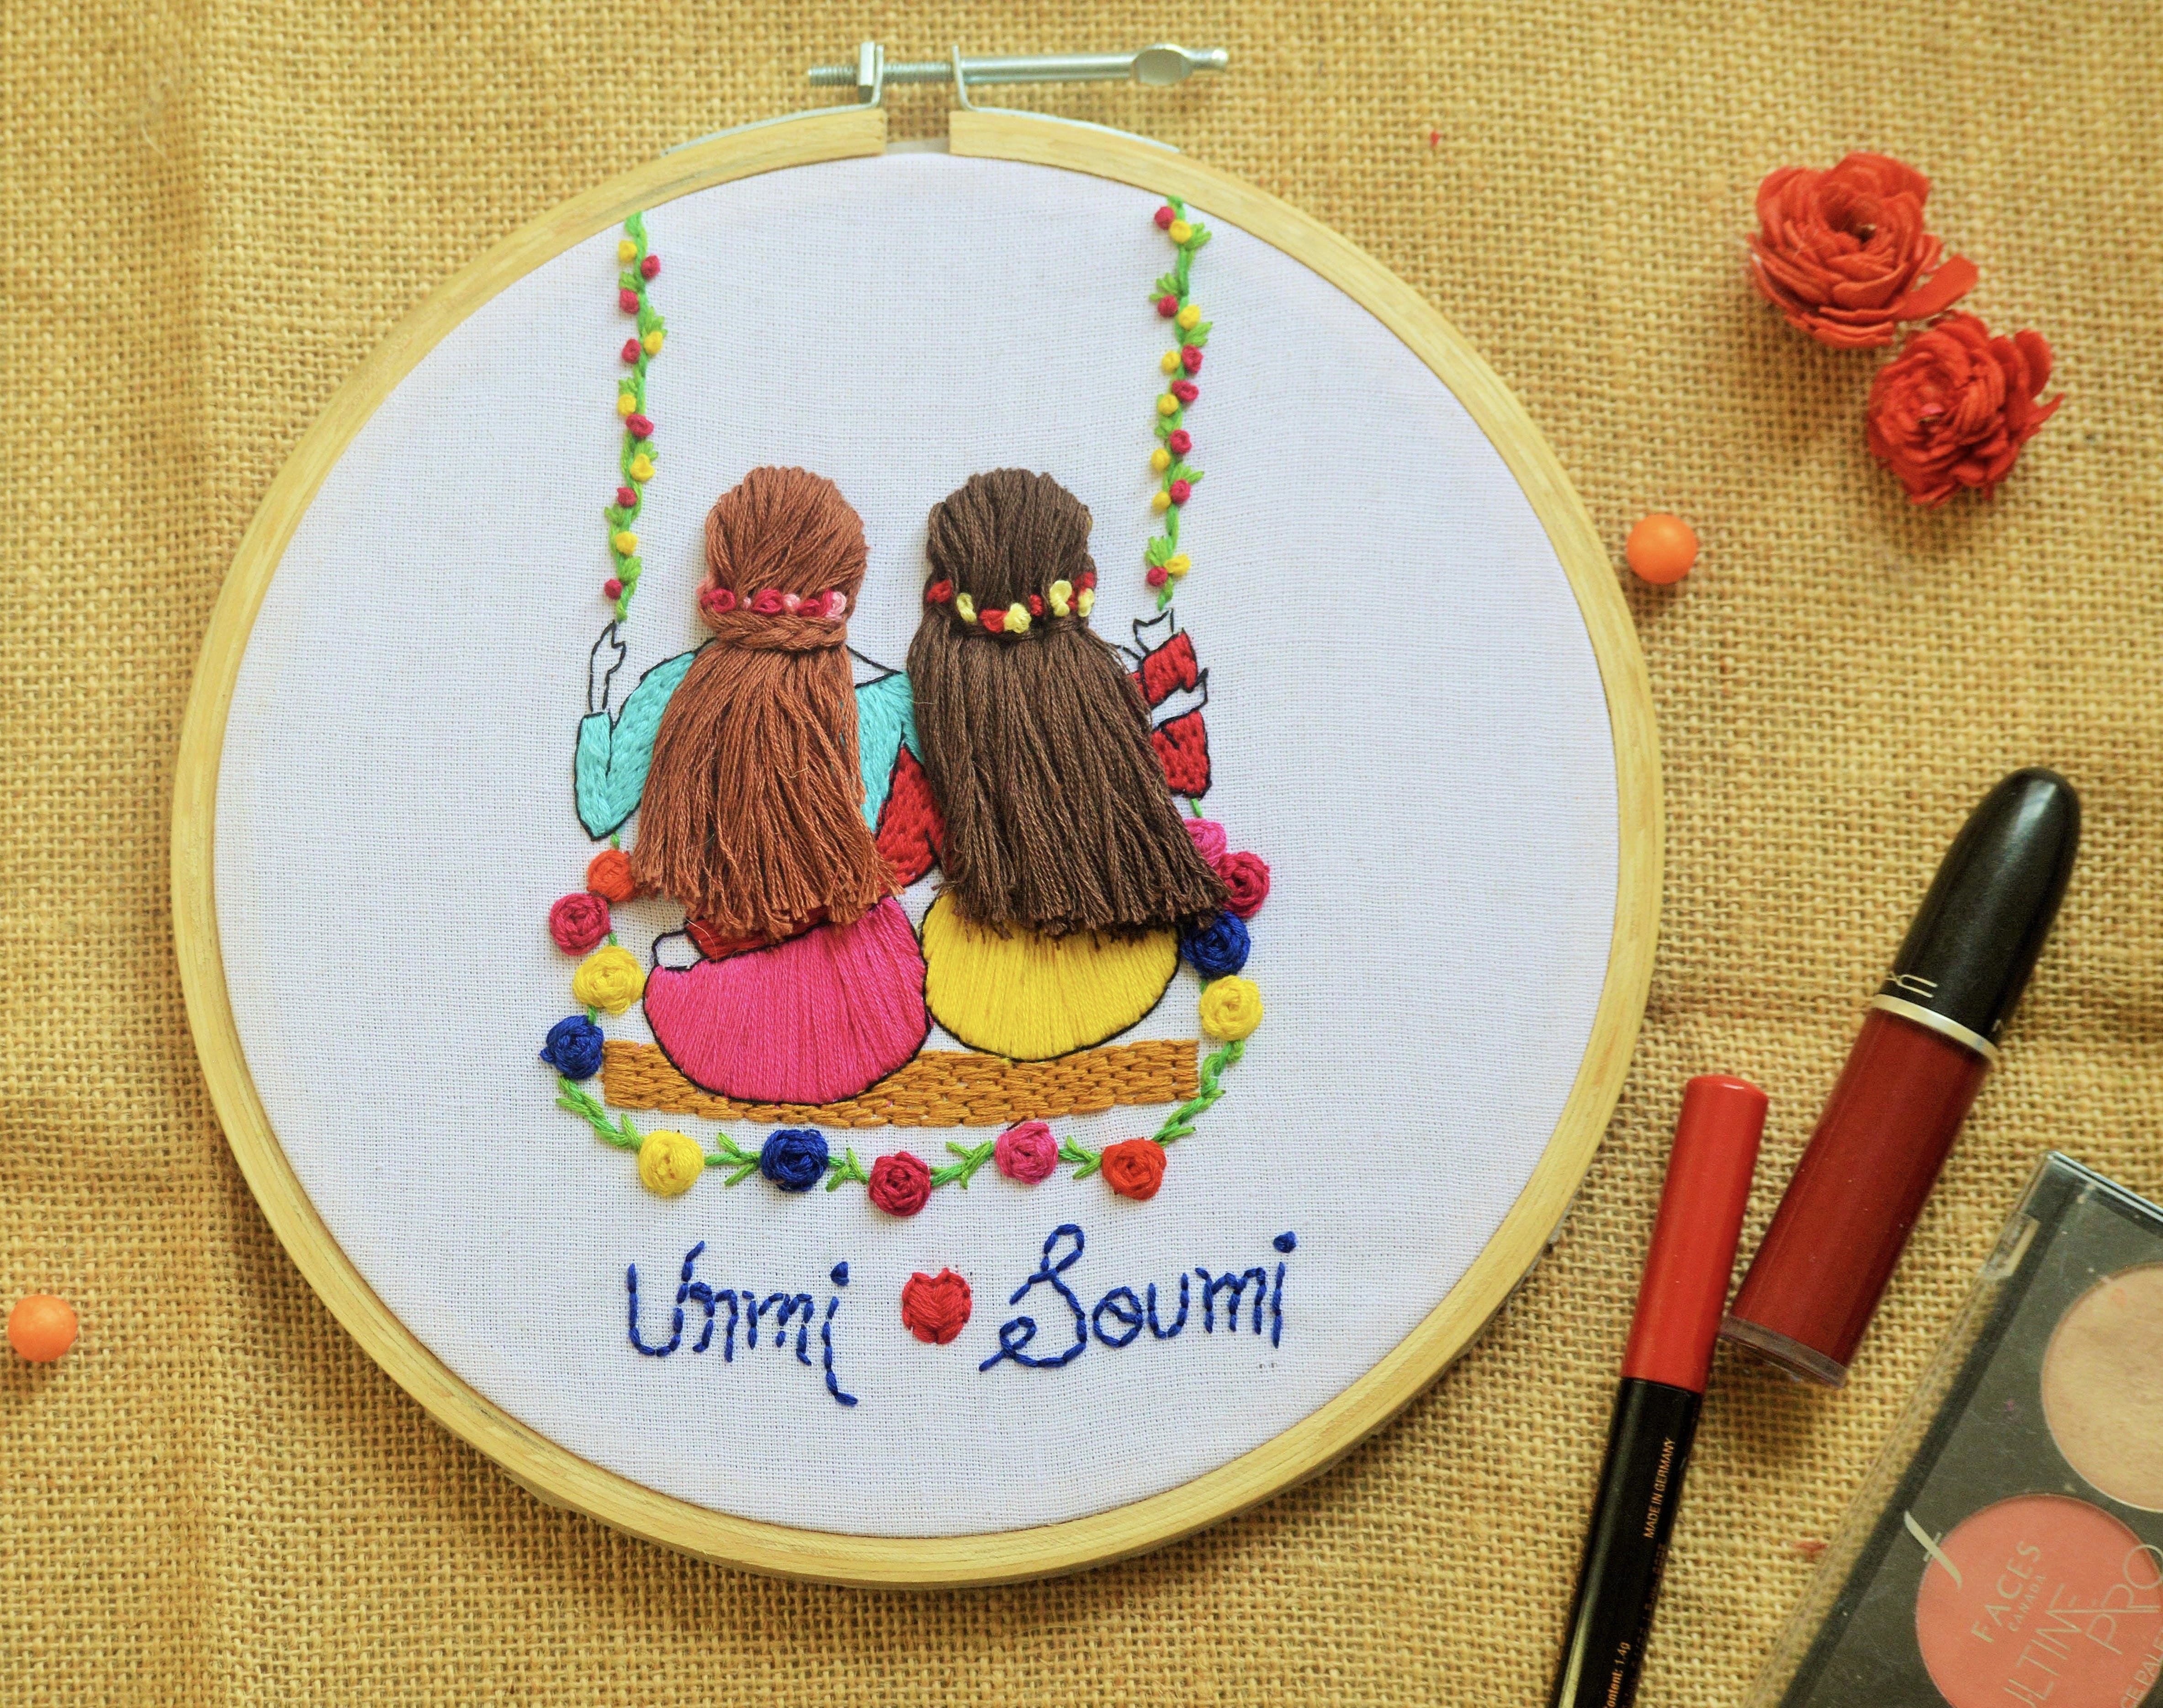 3D Embroidery Designs Feature Women with Flowing Hair and Dresses